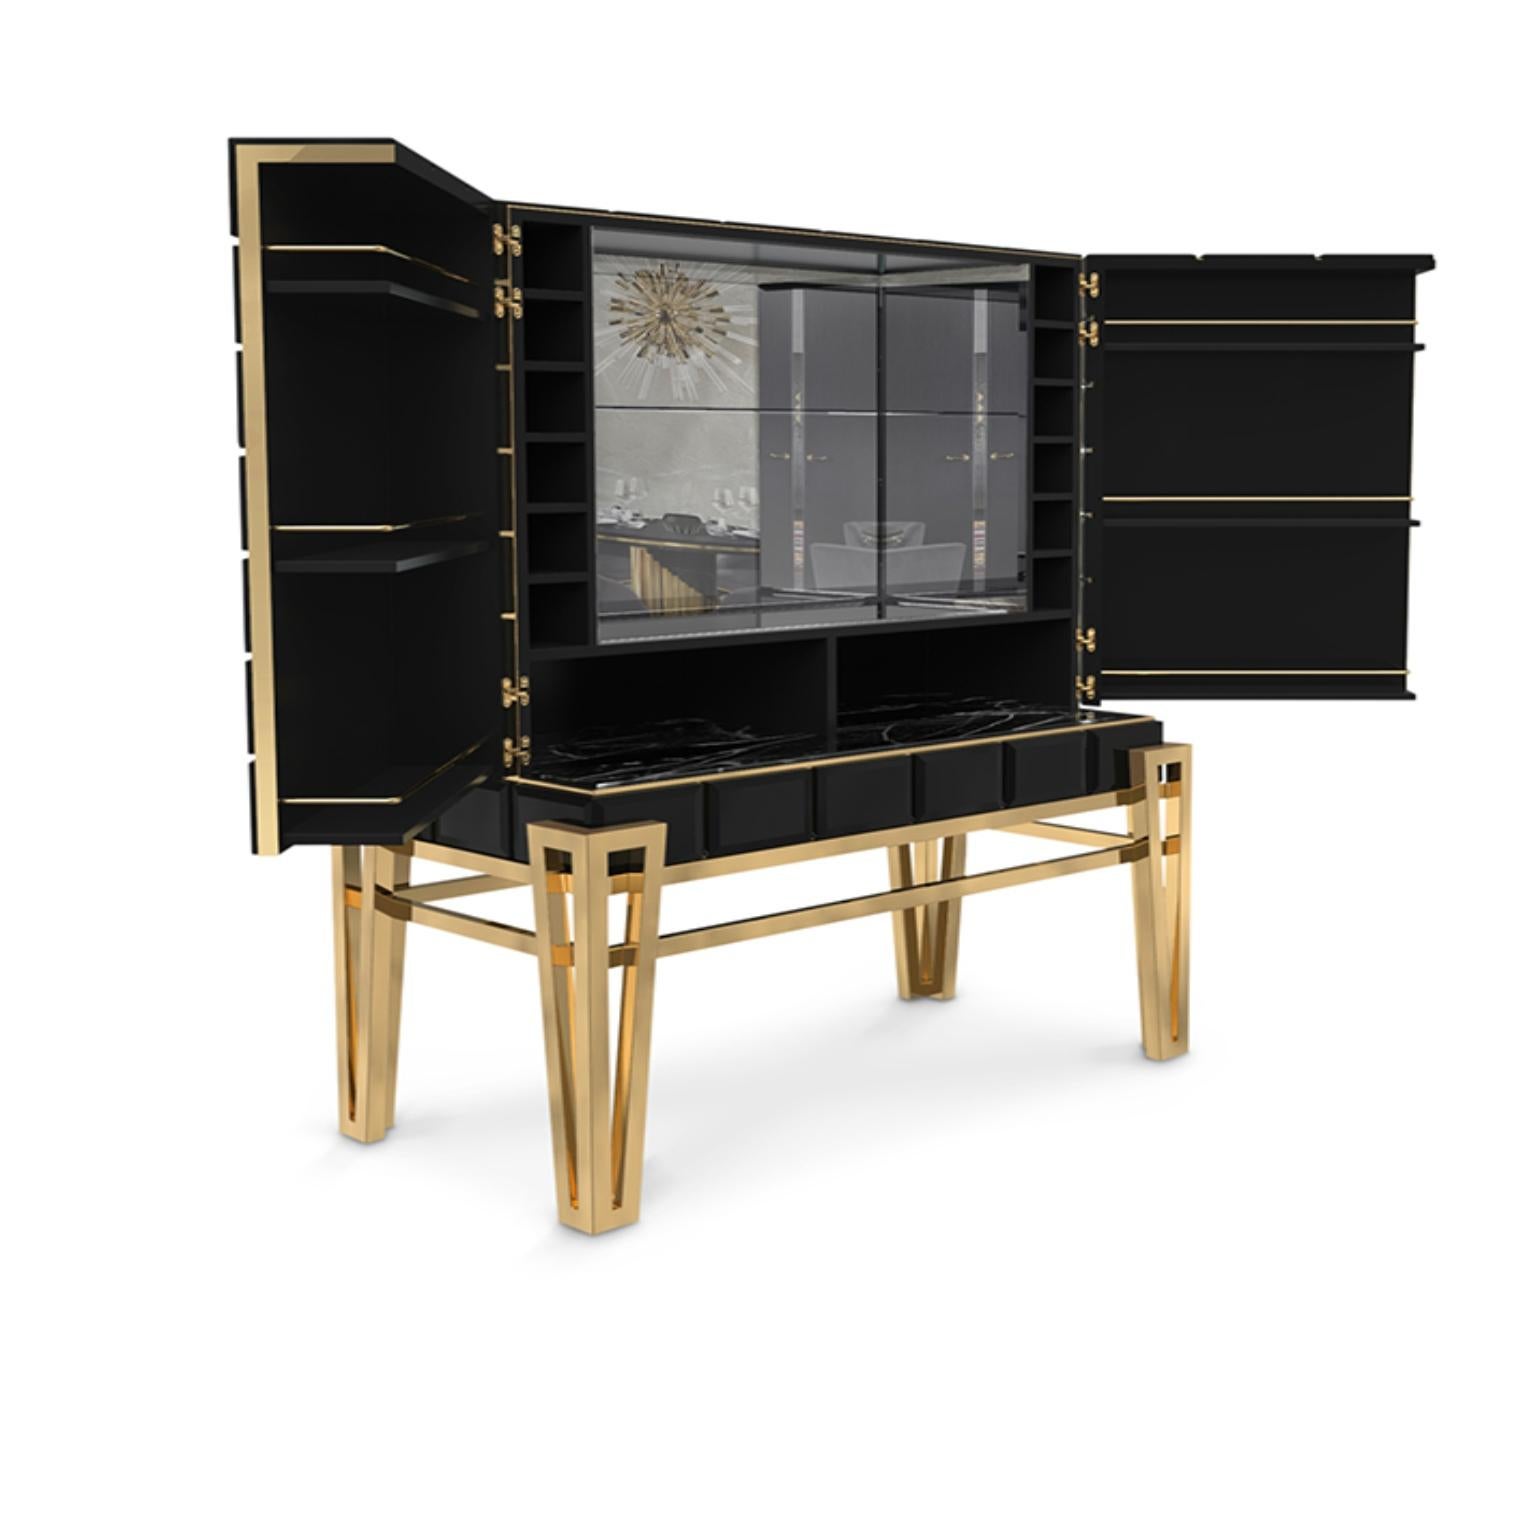 Inspired by the geometric Nubian pyramids, the Nubian bar cabinet presents a daring design and shape. Made of brass, glass, marble, wood and with a mirrored interior, this piece is both functional and decorative, a true piece of art that will